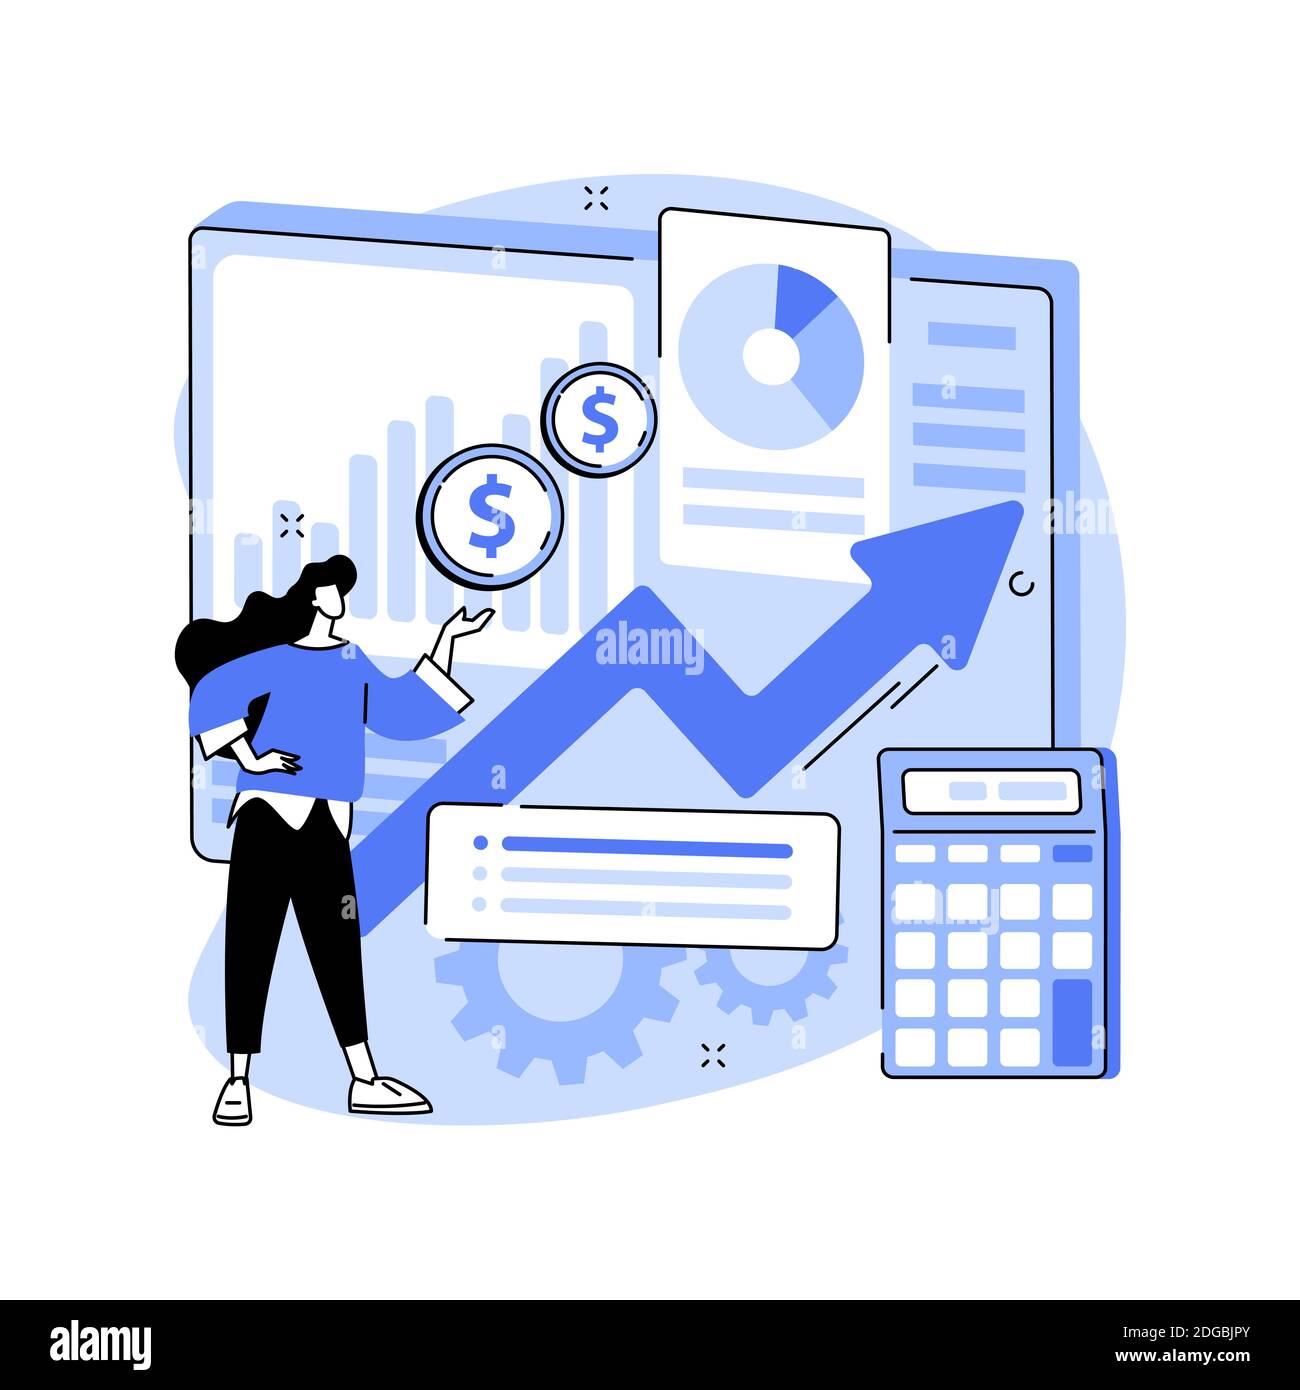 Demand planning abstract concept vector illustration. Stock Vector